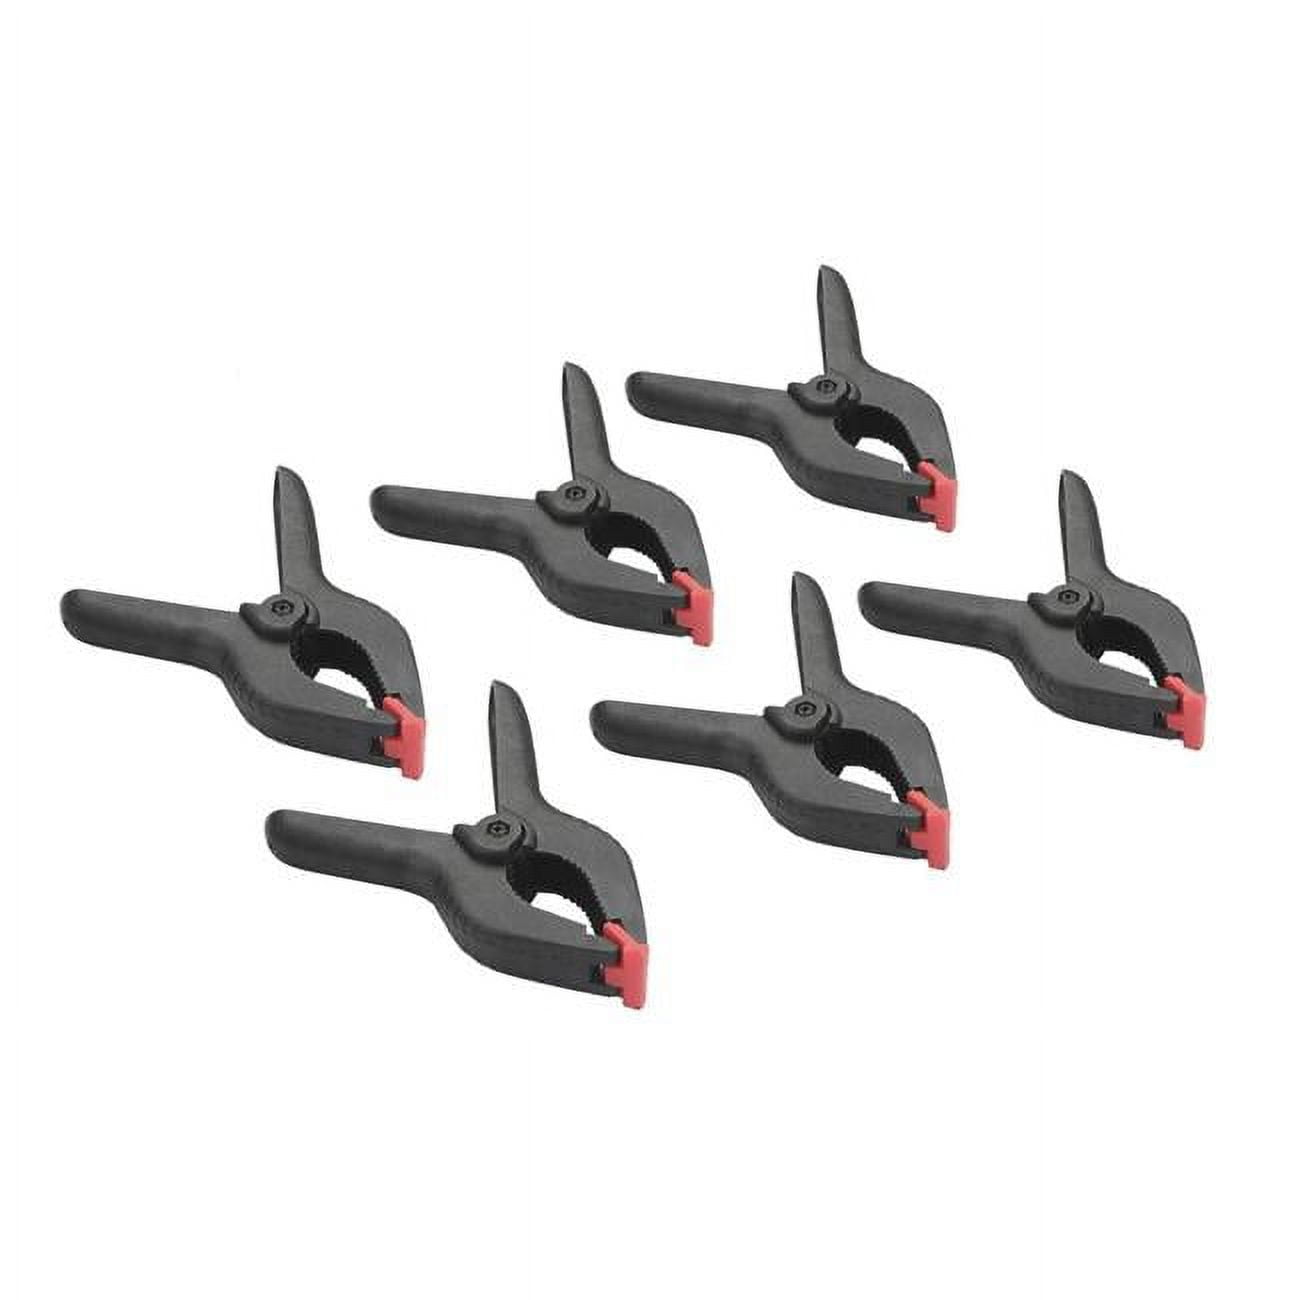 Picture of Allied 62620 2 in. Spring Clamps - 6 Piece